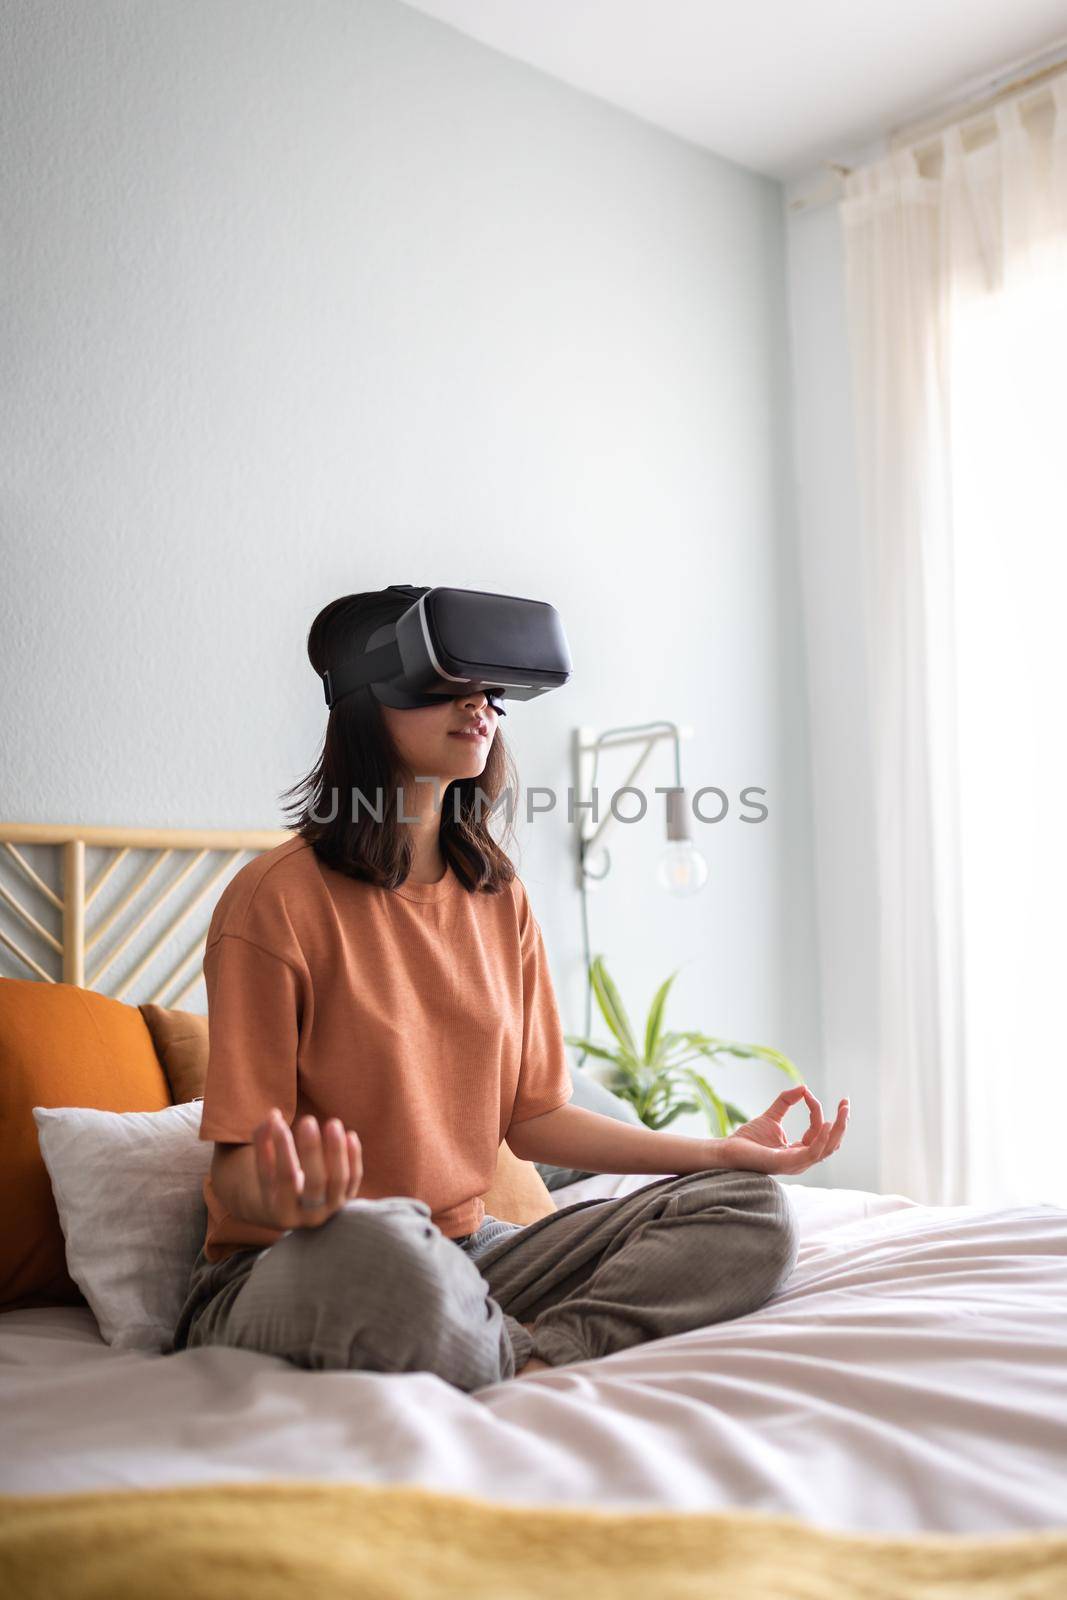 Teen asian girl meditating with help of VR experience app sitting on bed. Chinese young woman doing meditation using virtual reality goggles at home. Vertical. Copy space. Technology and healthy lifestyle concepts.